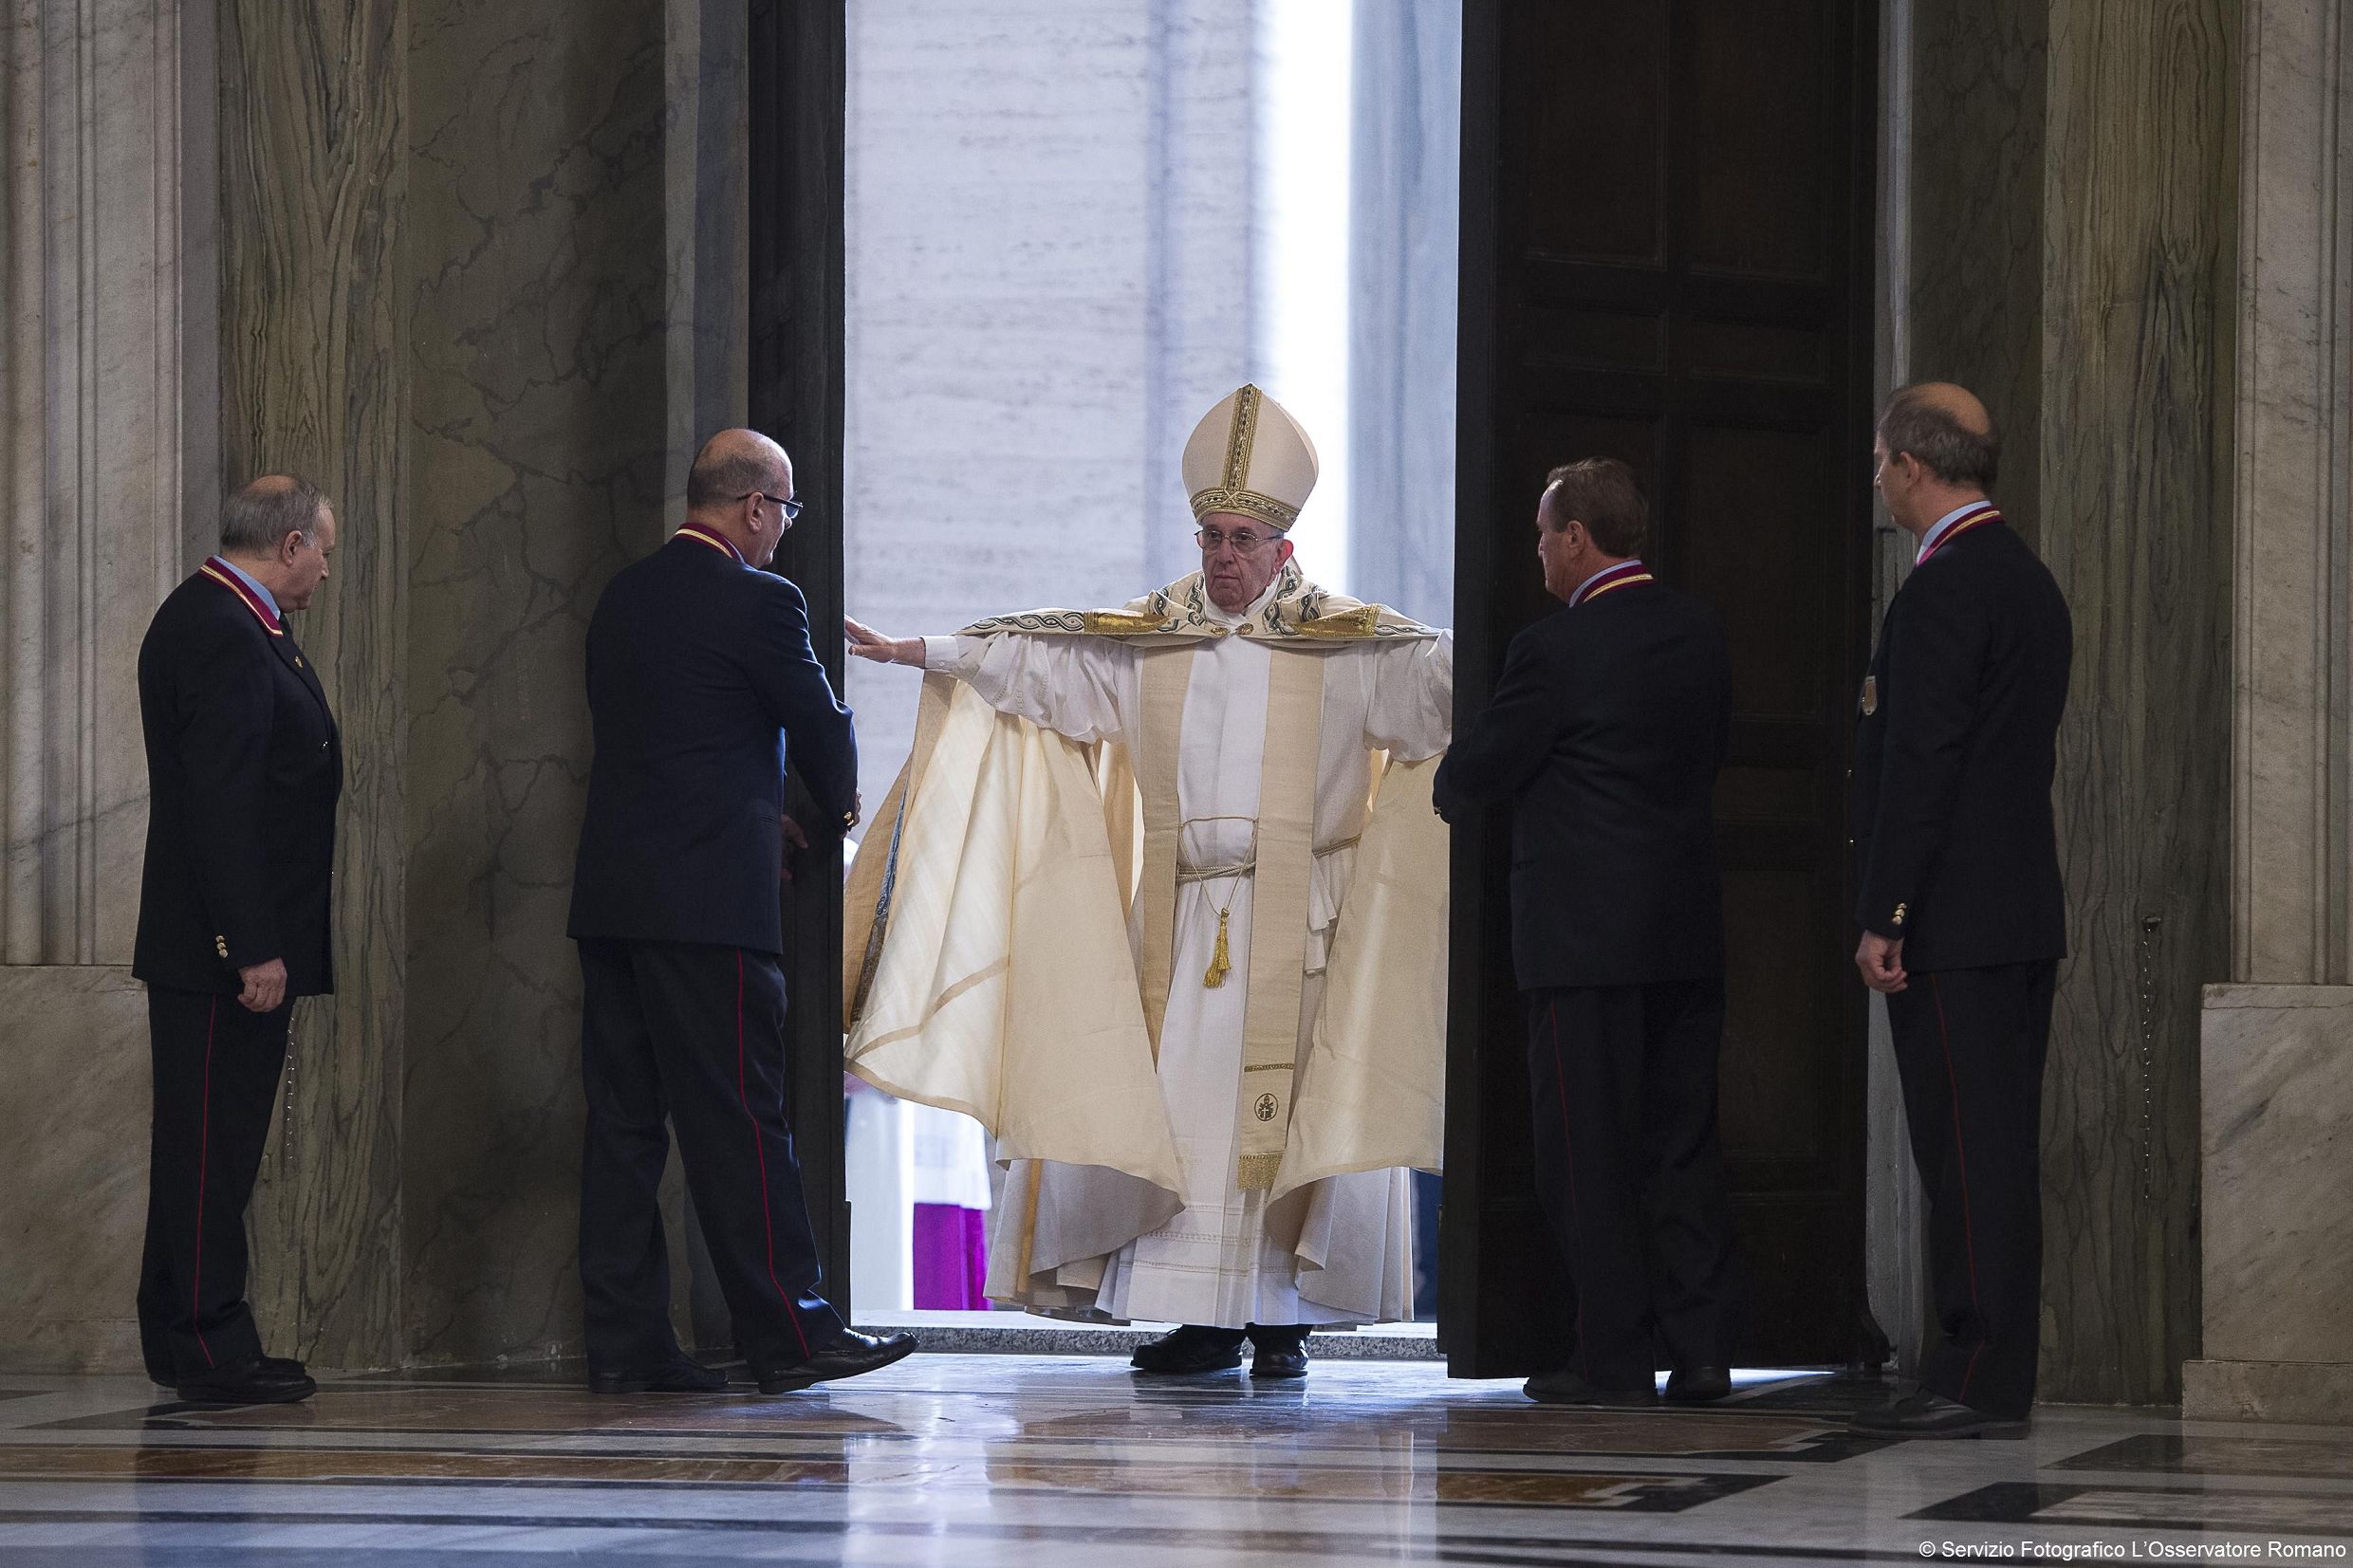 Pope Francis opens the Holy Door of St. Peter's Basilica to inaugurate the Jubilee Year of Mercy at the Vatican Dec. 8, 2015. (CNS/L'Osservatore Romano, handout)